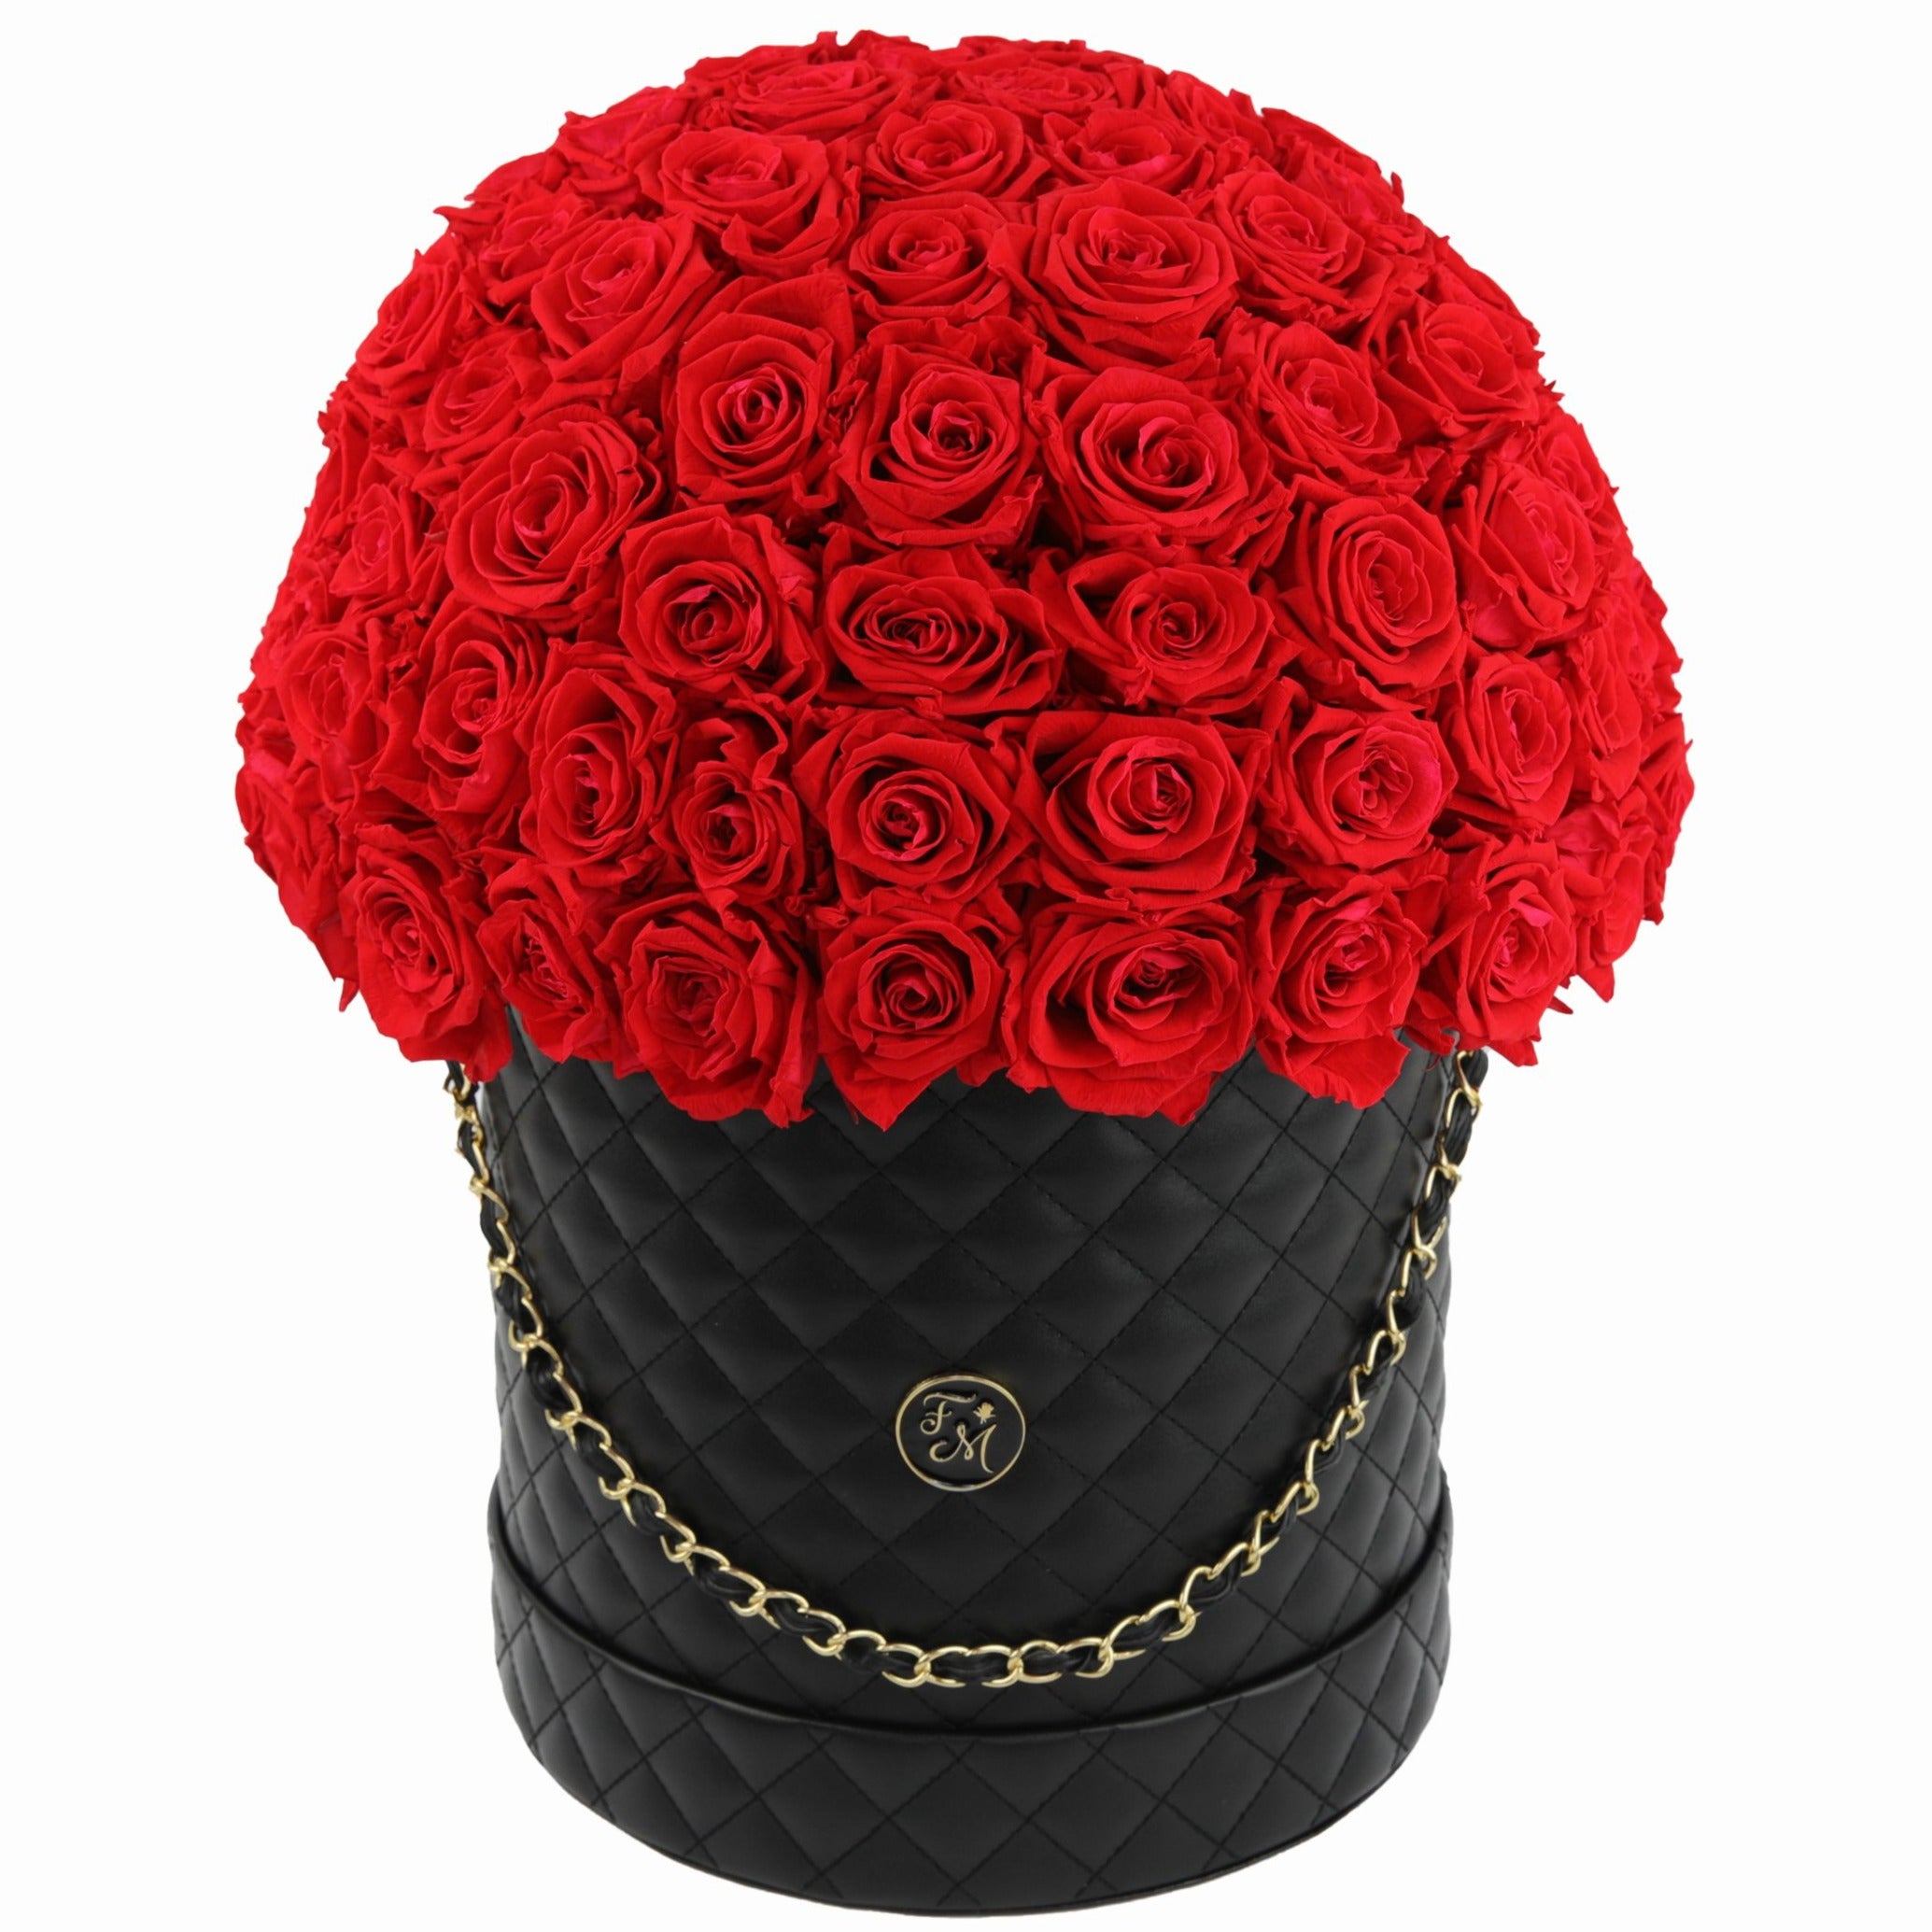 Red Roses - Quilted Box Dome Bouquet - Large (Black Box)